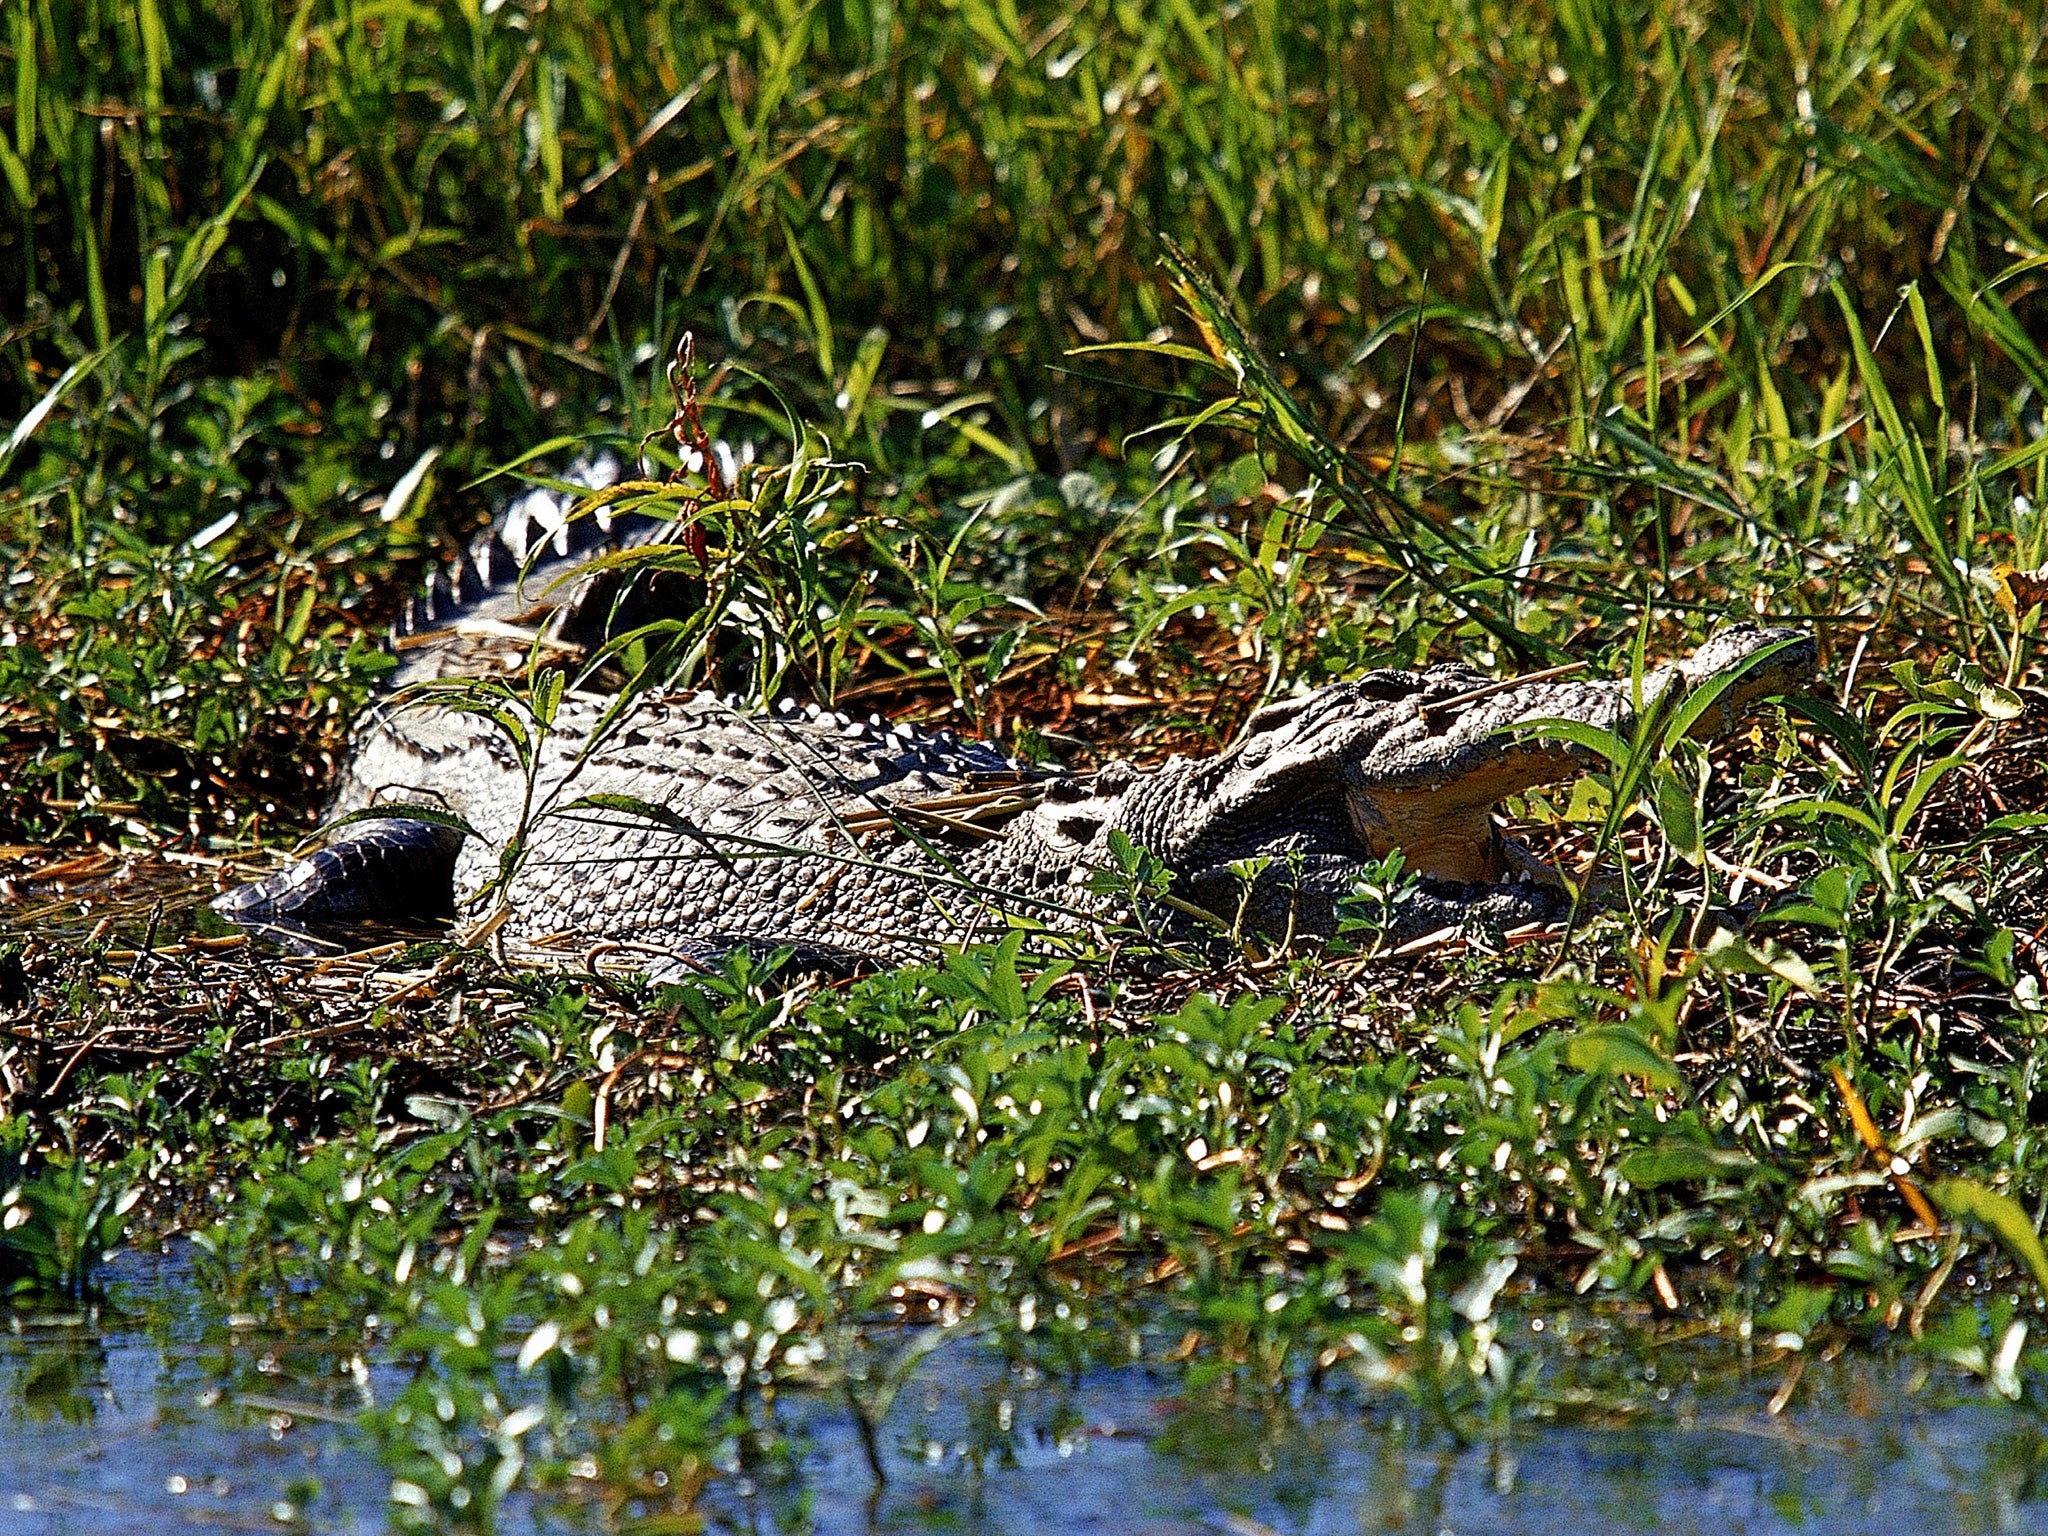 The Northern Territory, where Kakadu National Park is located, has the densest crocodile population in Australia